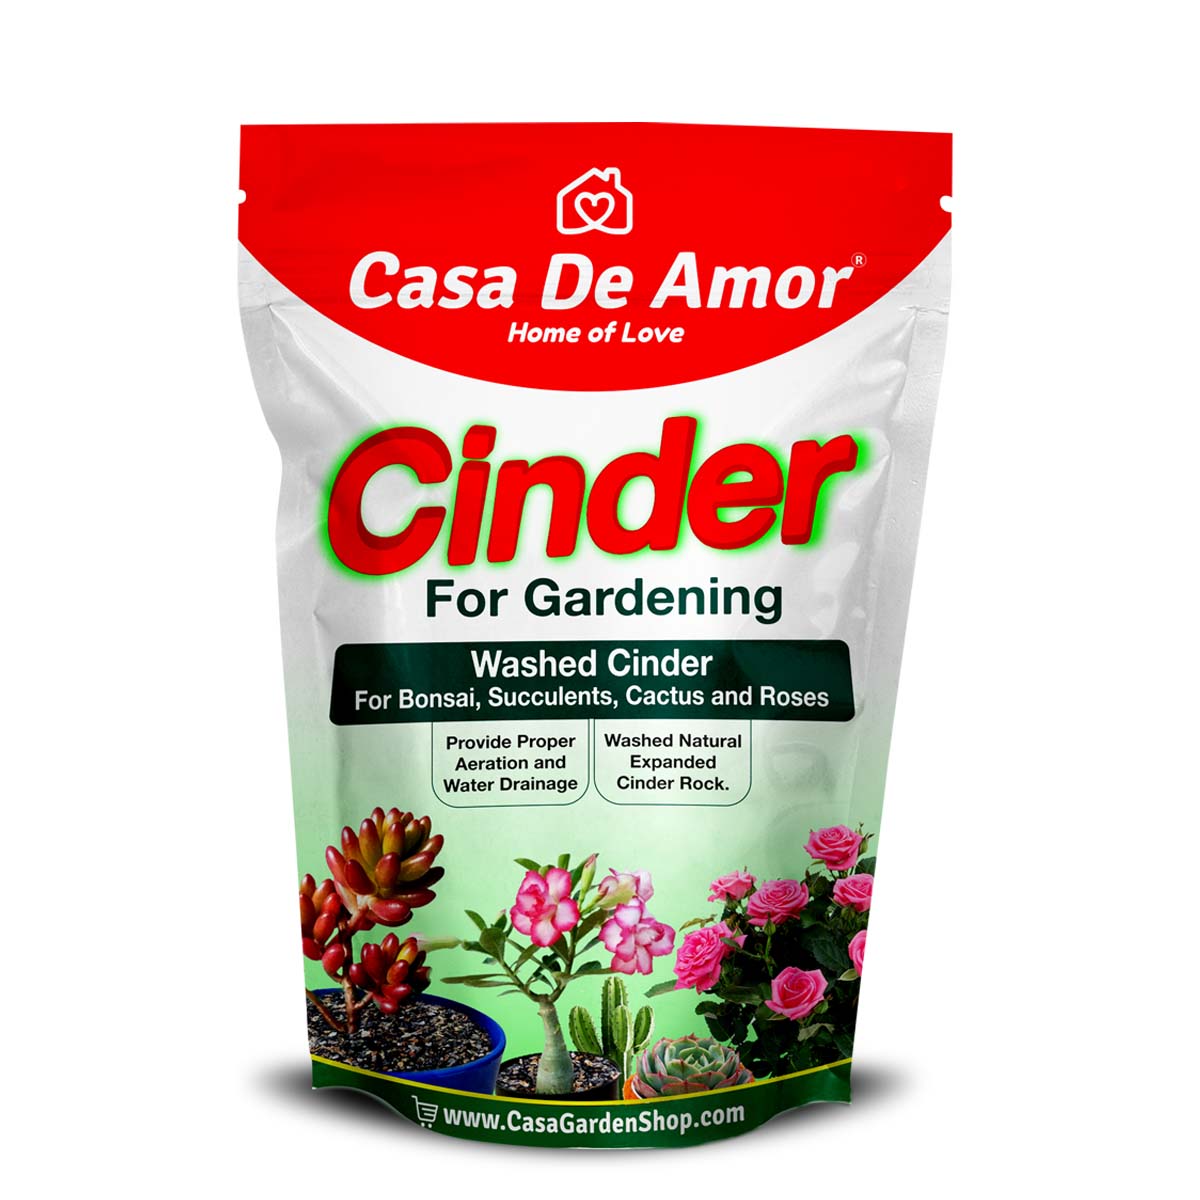 Cinder for Gardening, Washed, For Bonsai, Succulents, Cactus and Roses